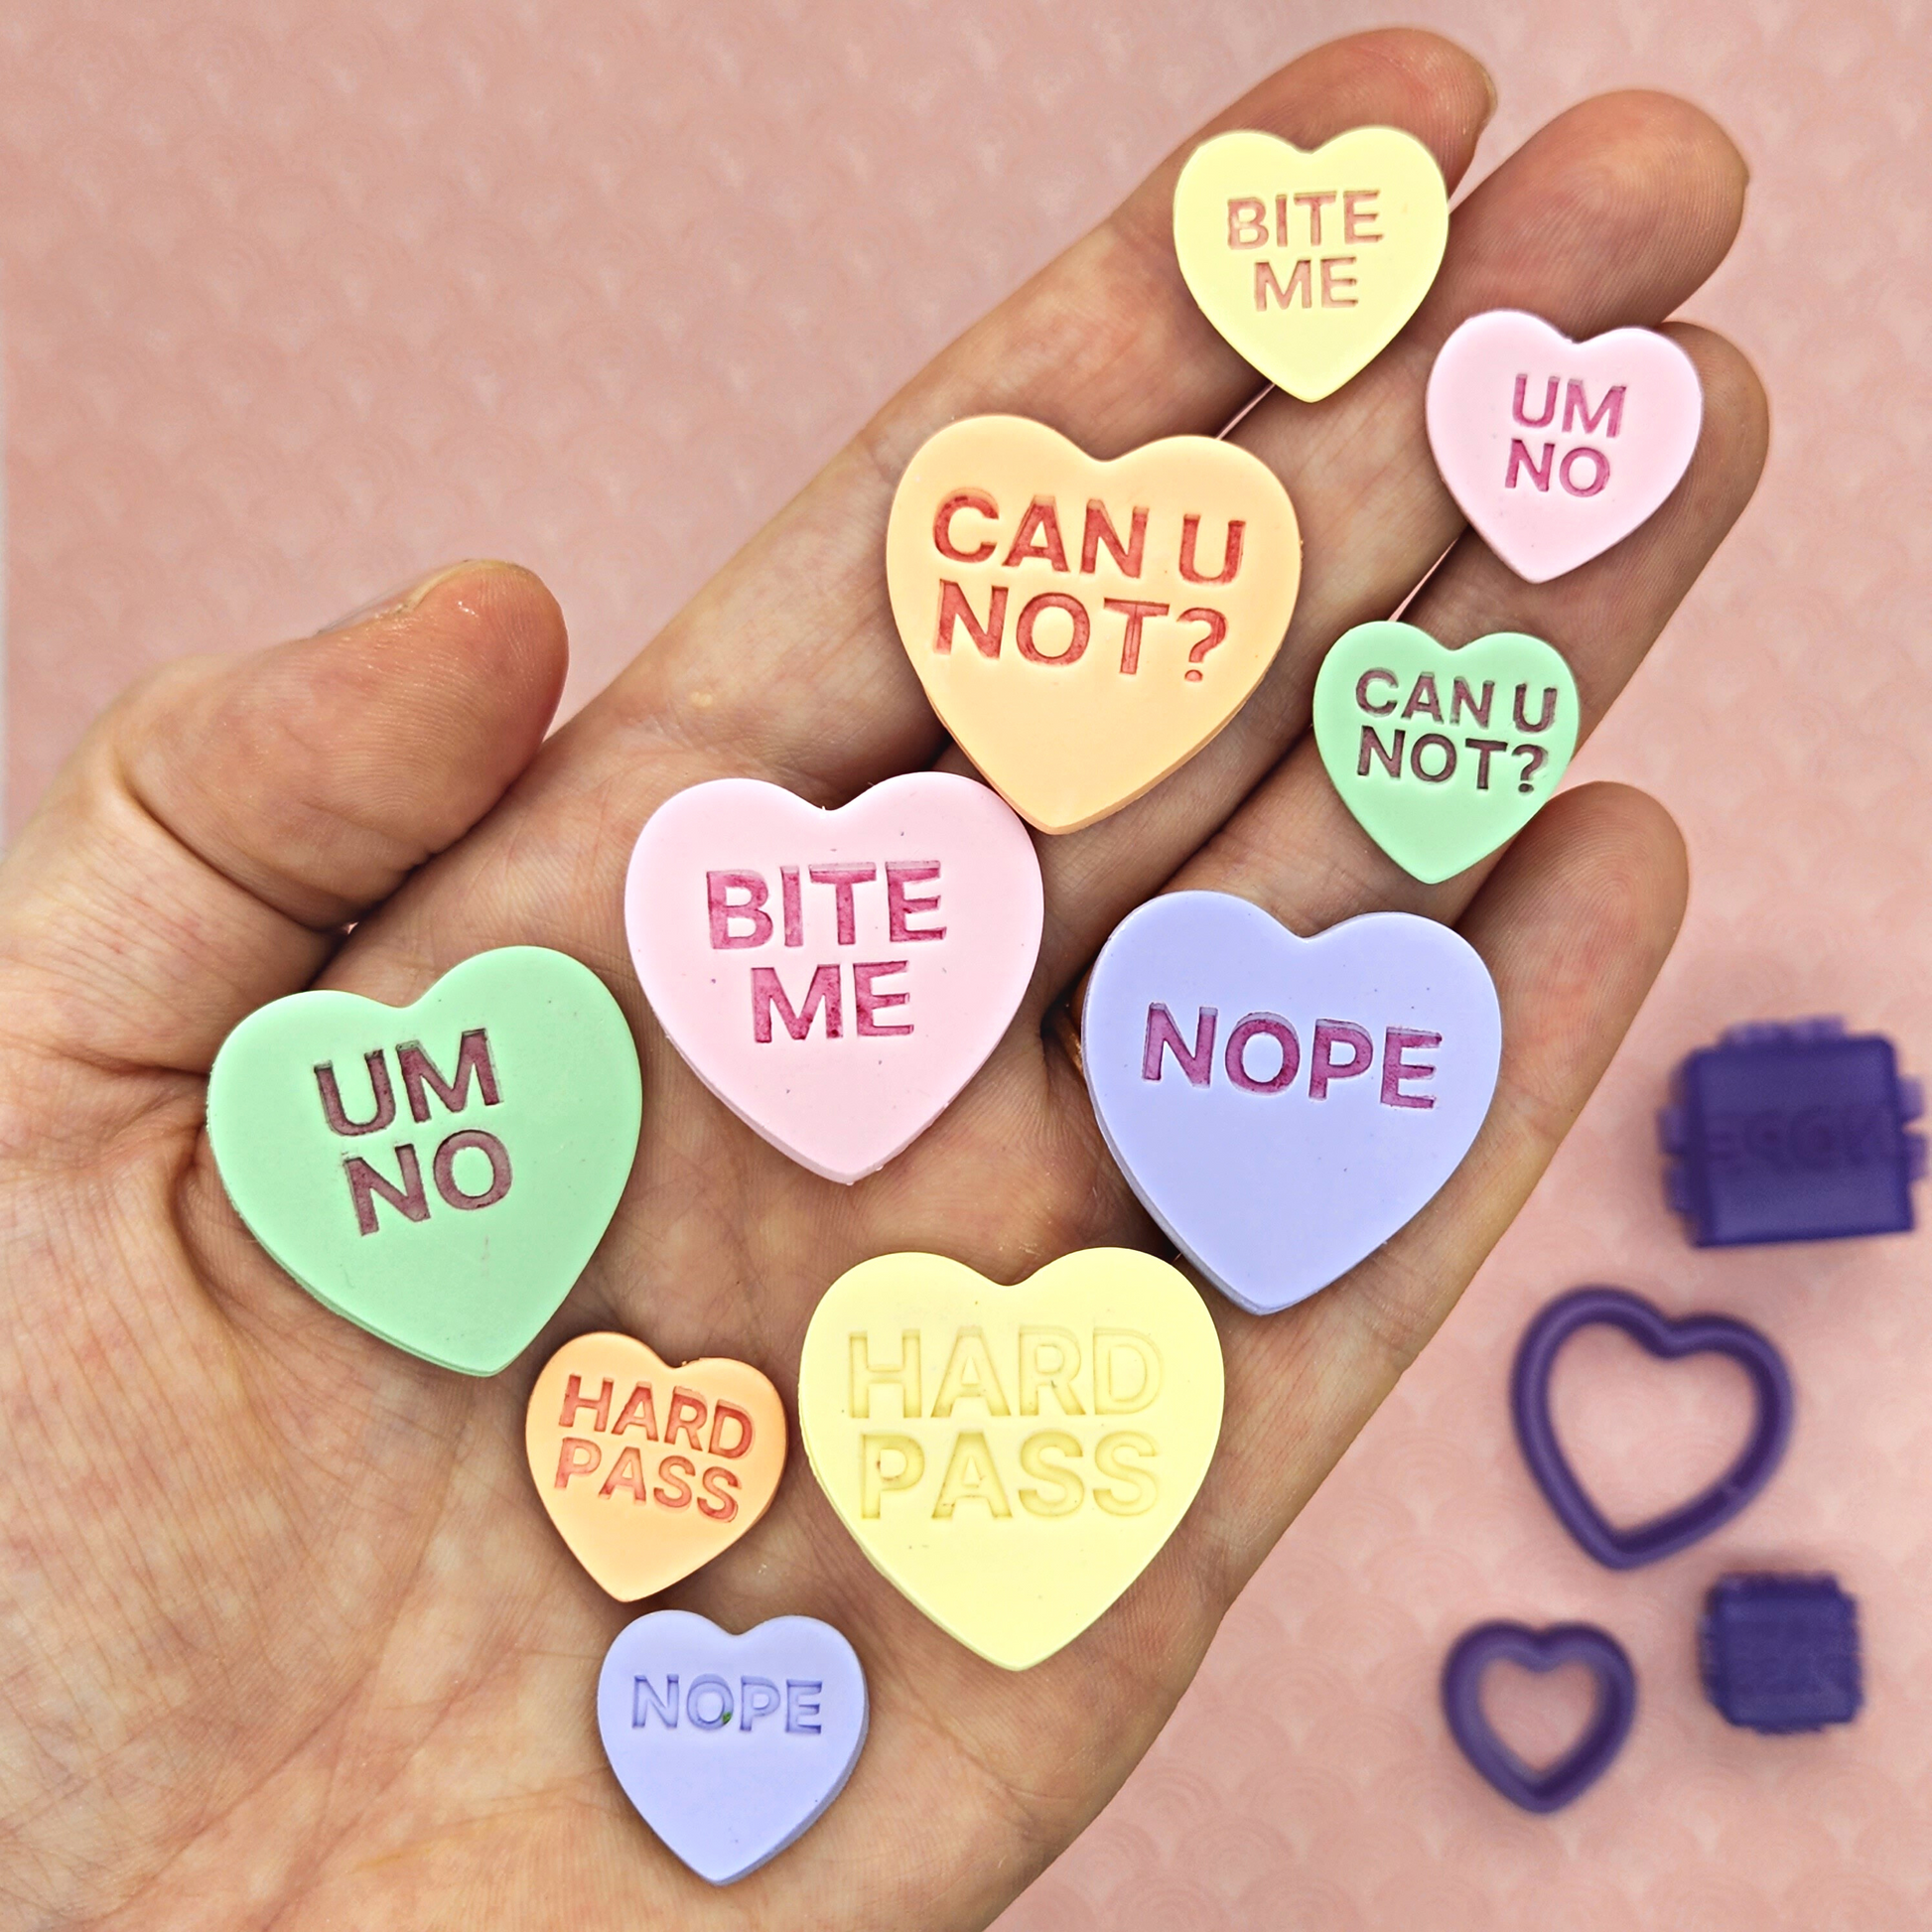 candy conversation hearts on polymer clay with words "CAN U NOT?", "BITE ME", "UM NO", "NOPE", and "HARD PASS". Sample finish product